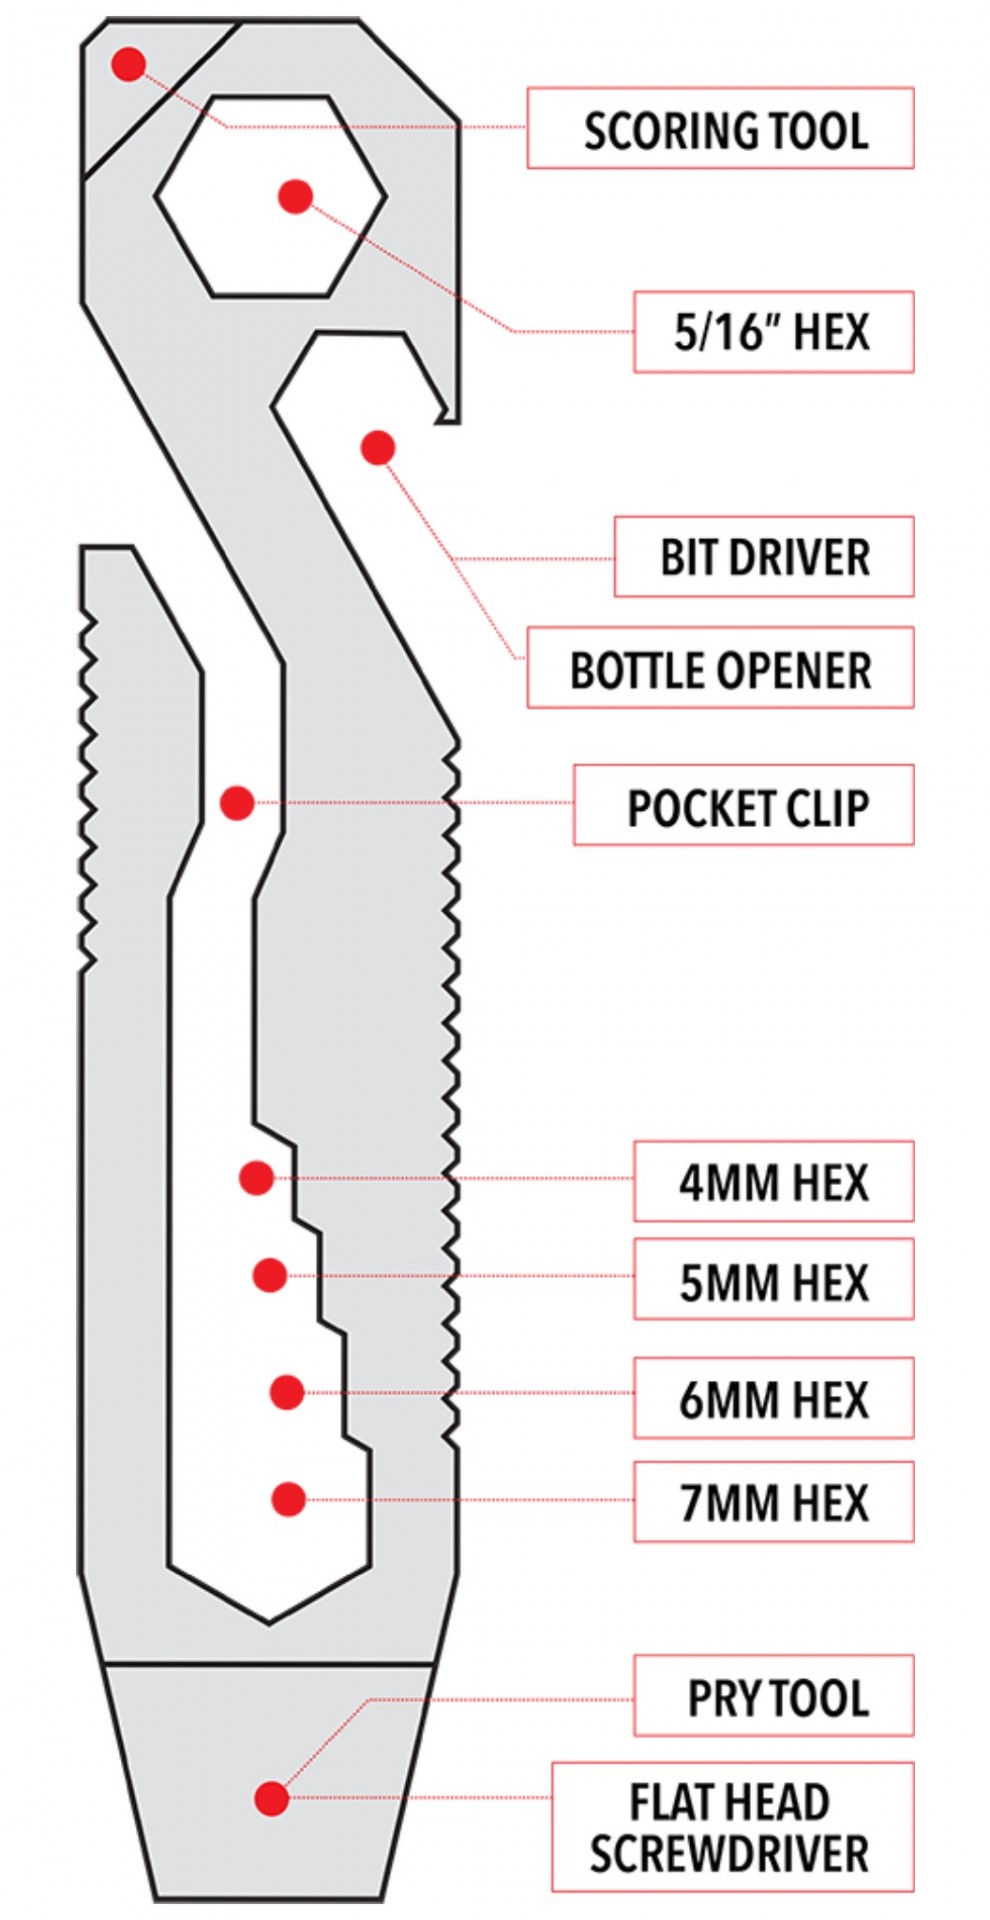 griffin-pocket-tool-anatomy-map